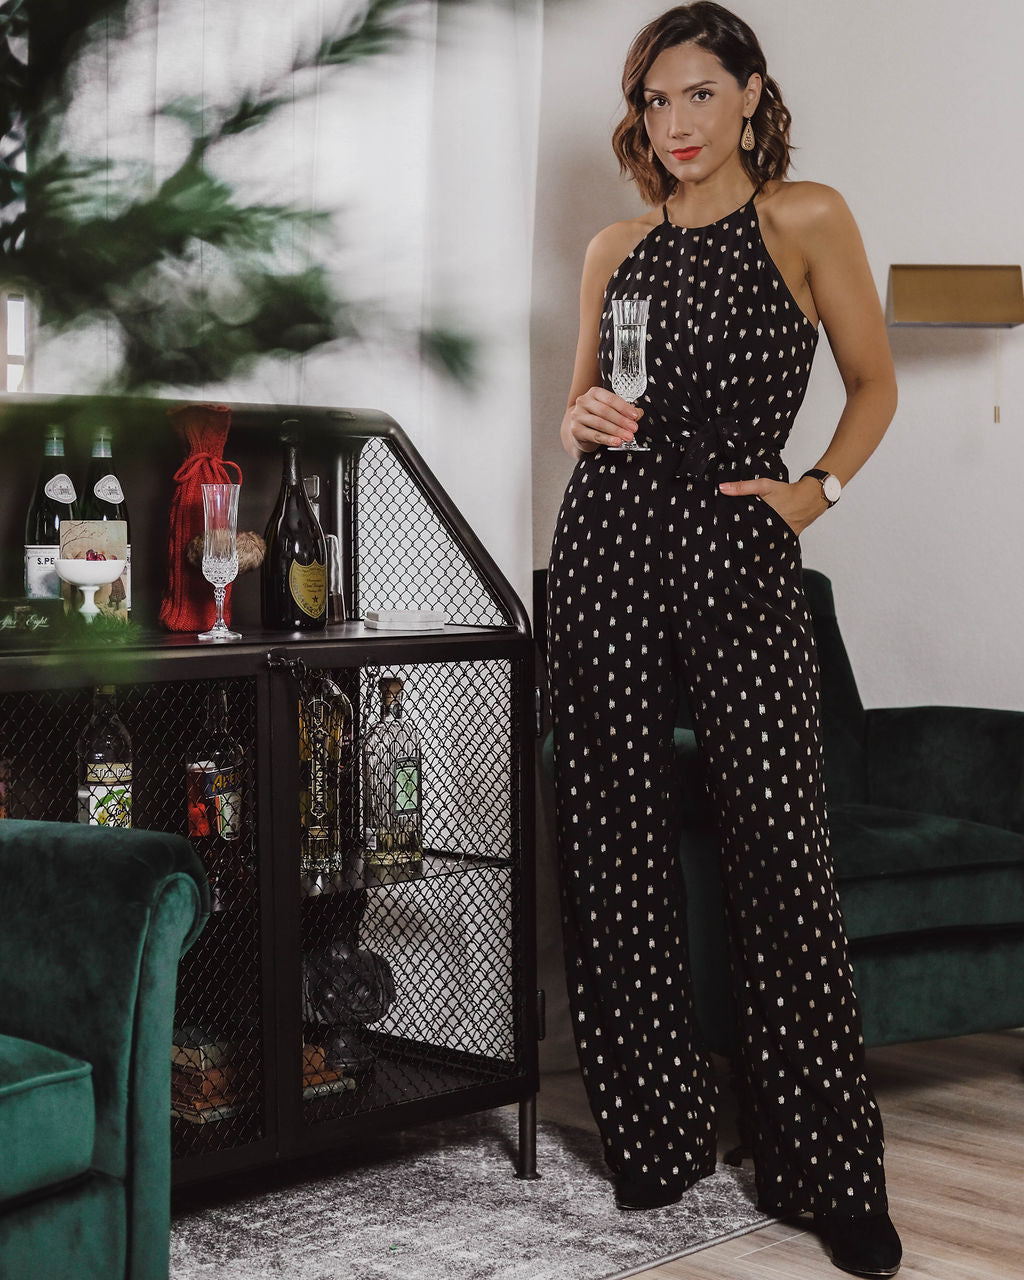 Why I Love Jumpsuits & The Perfect New Year’s Jumpsuit